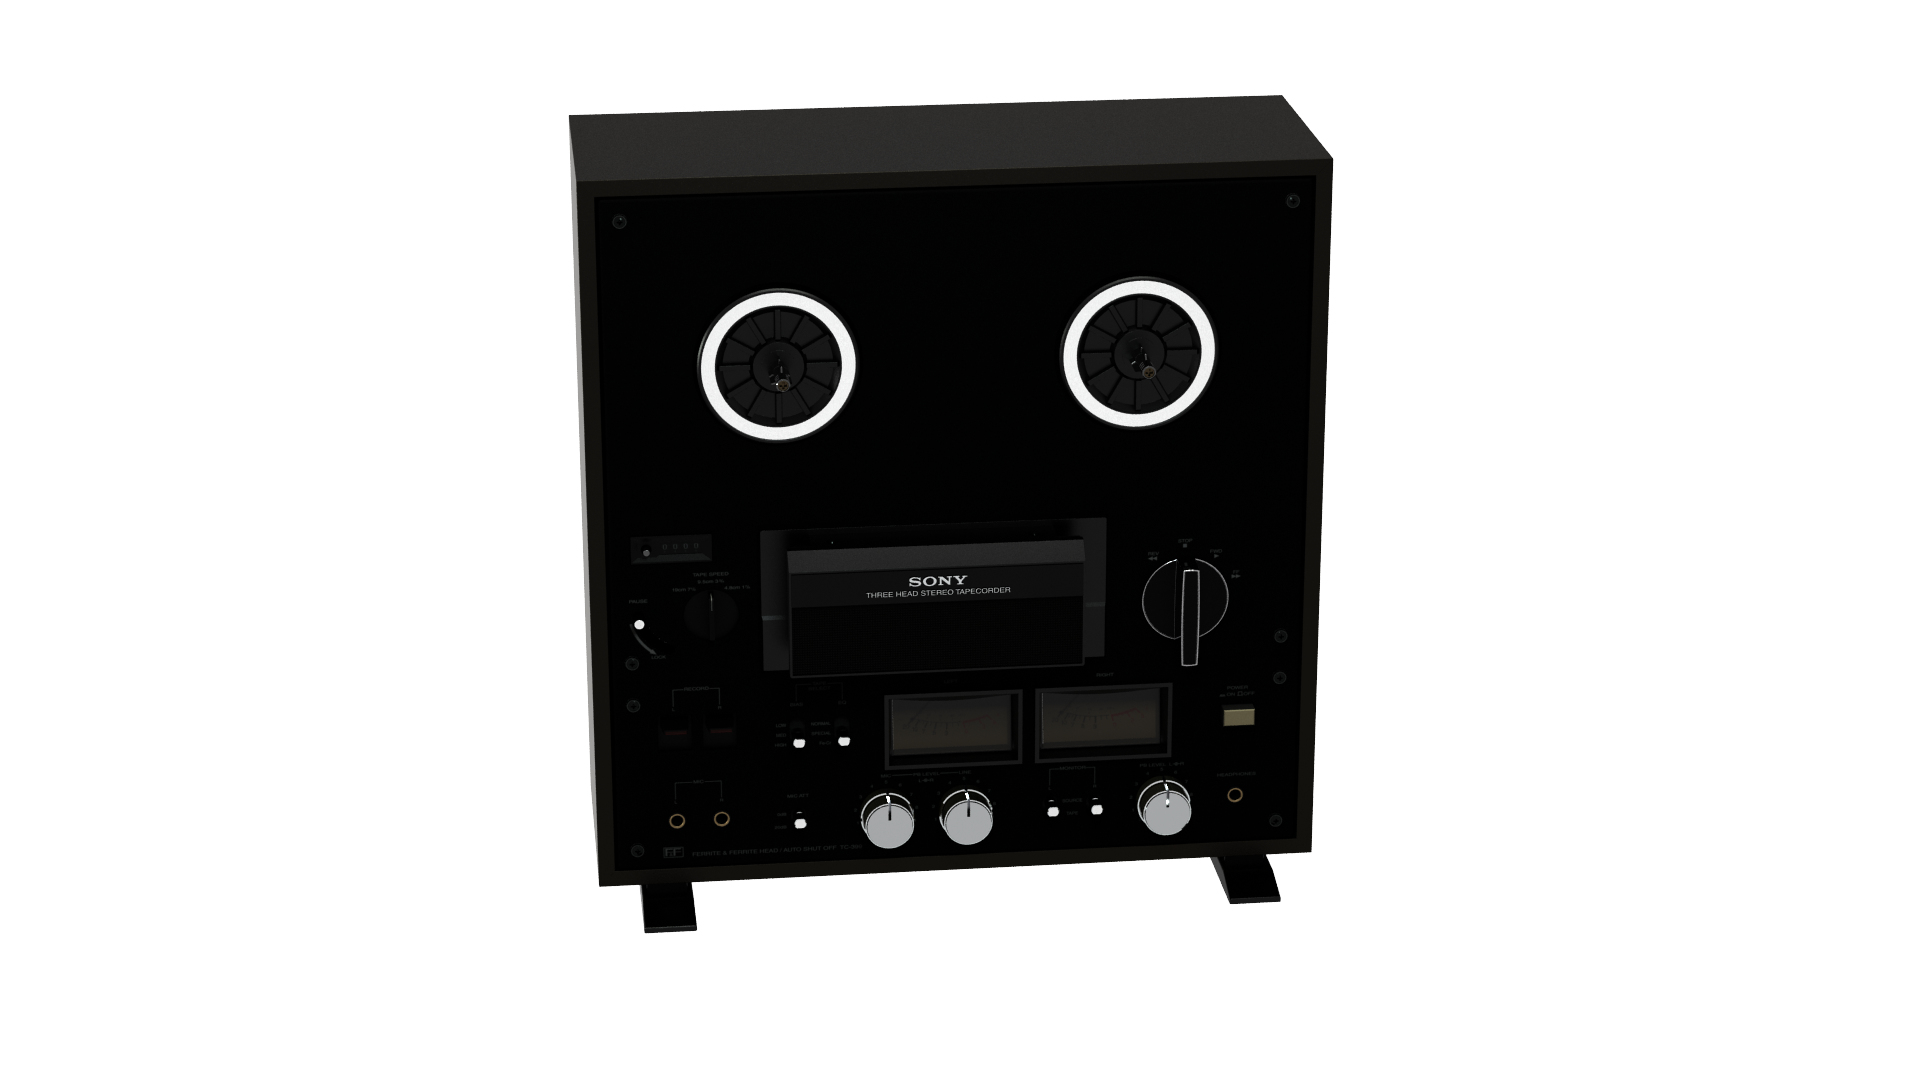 Reel-to-reel audio tape recording Tape recorder Stereophonic sound, audio  cassette, electronics, stereophonic Sound, reel png